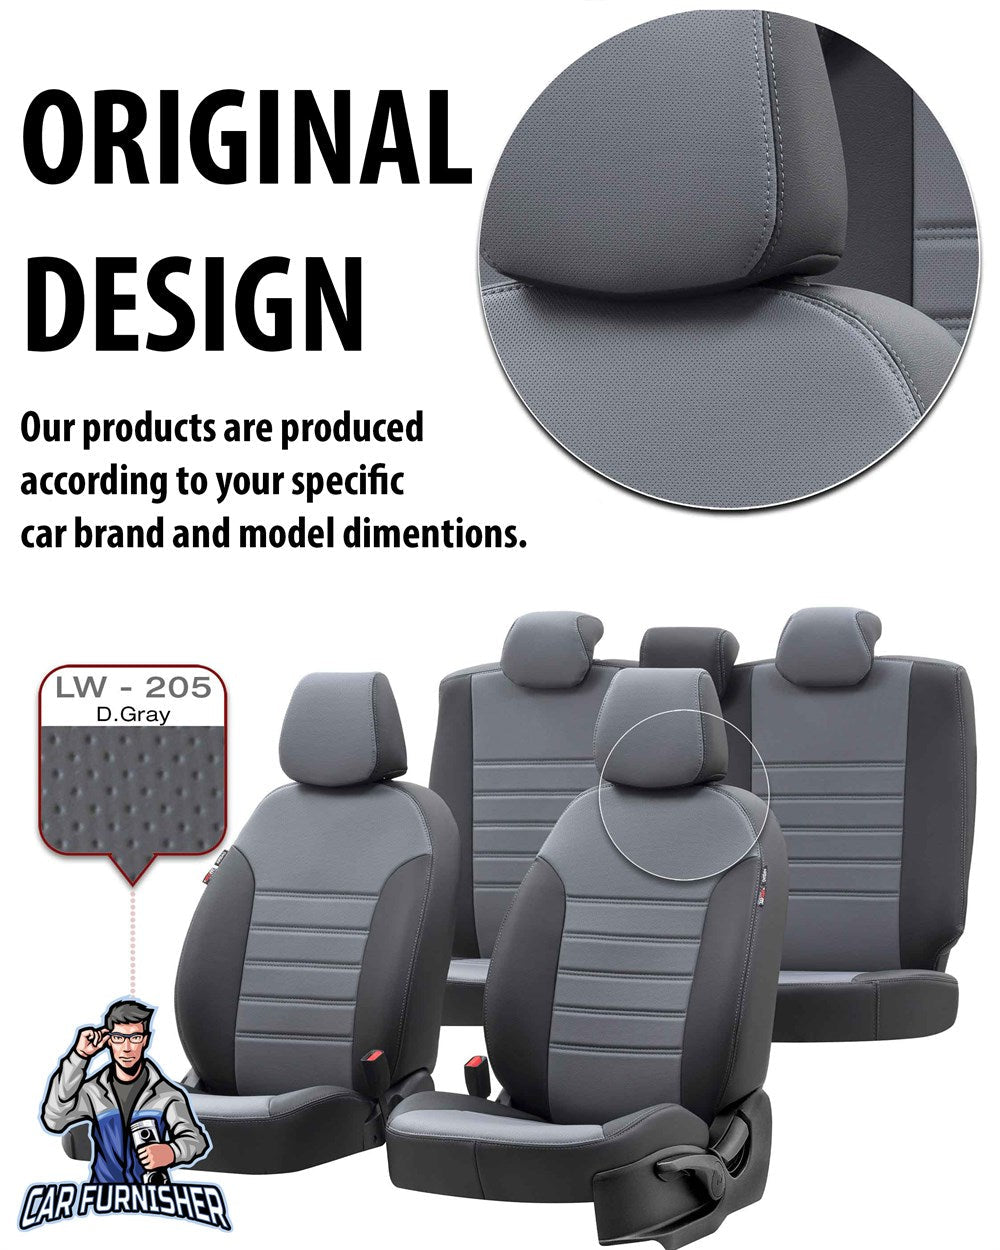 Kia Picanto Seat Covers Istanbul Leather Design Smoked Black Leather